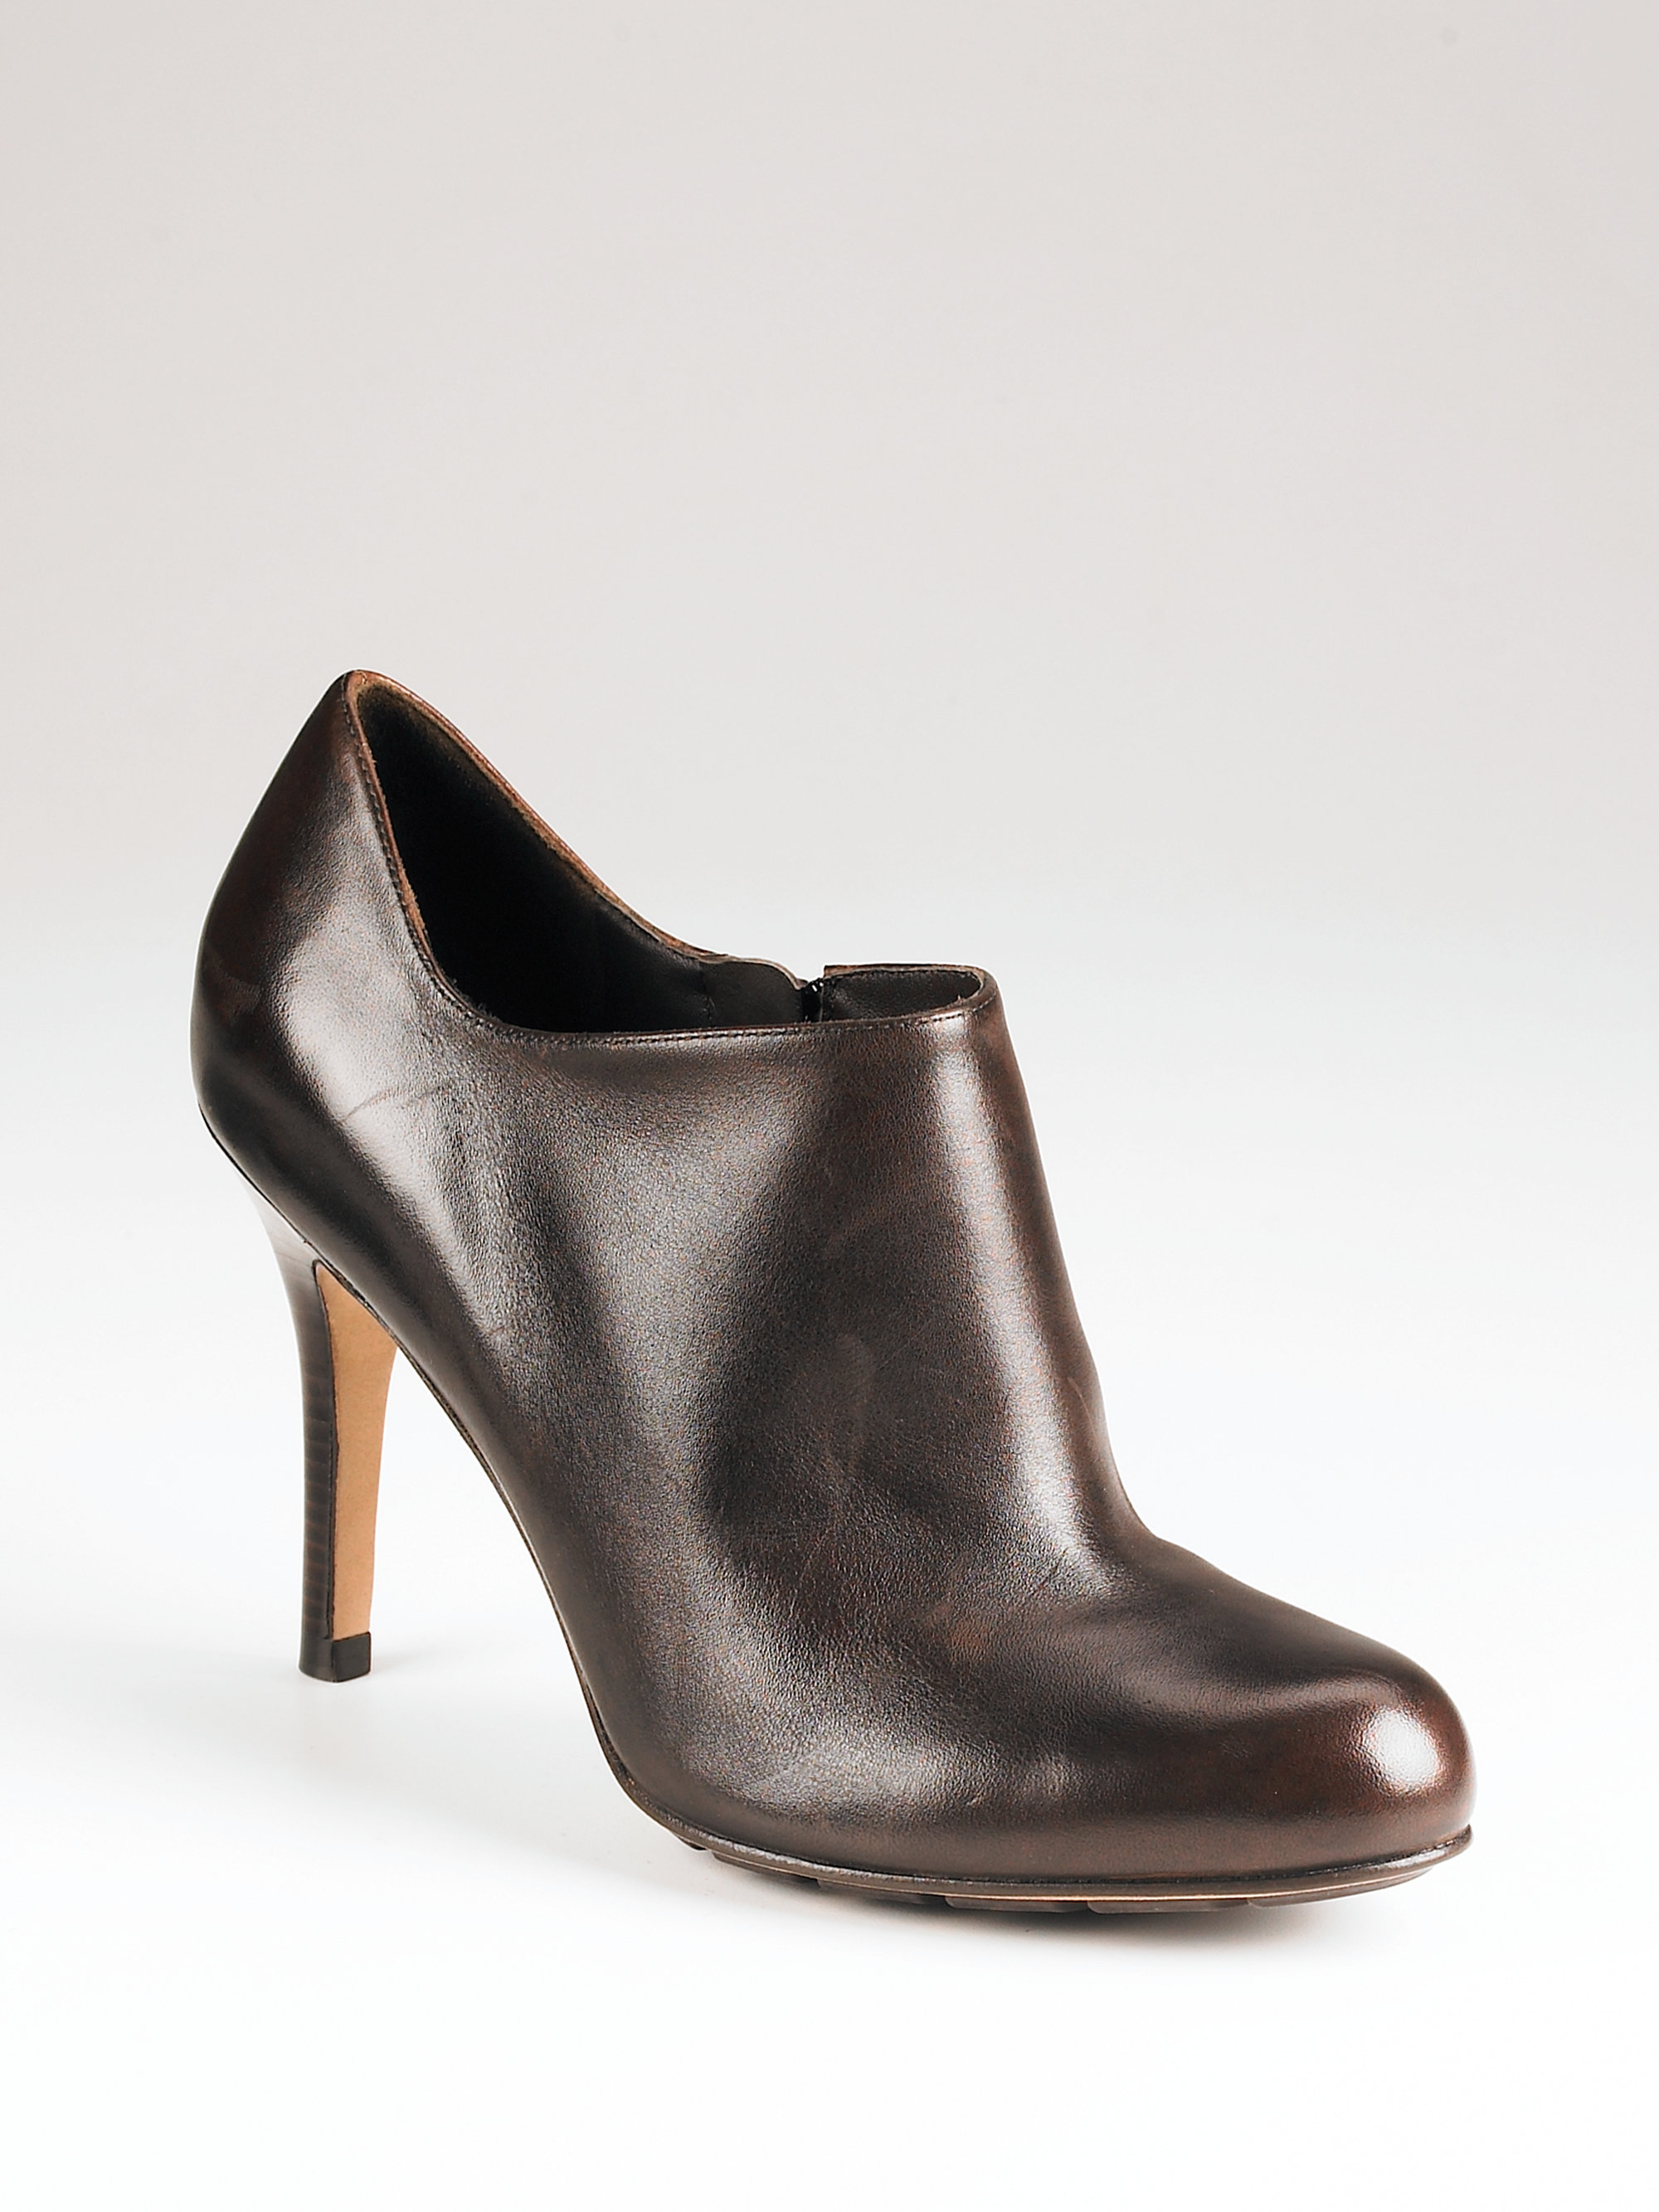 Cole Haan Air Talia Ankle Boots in 